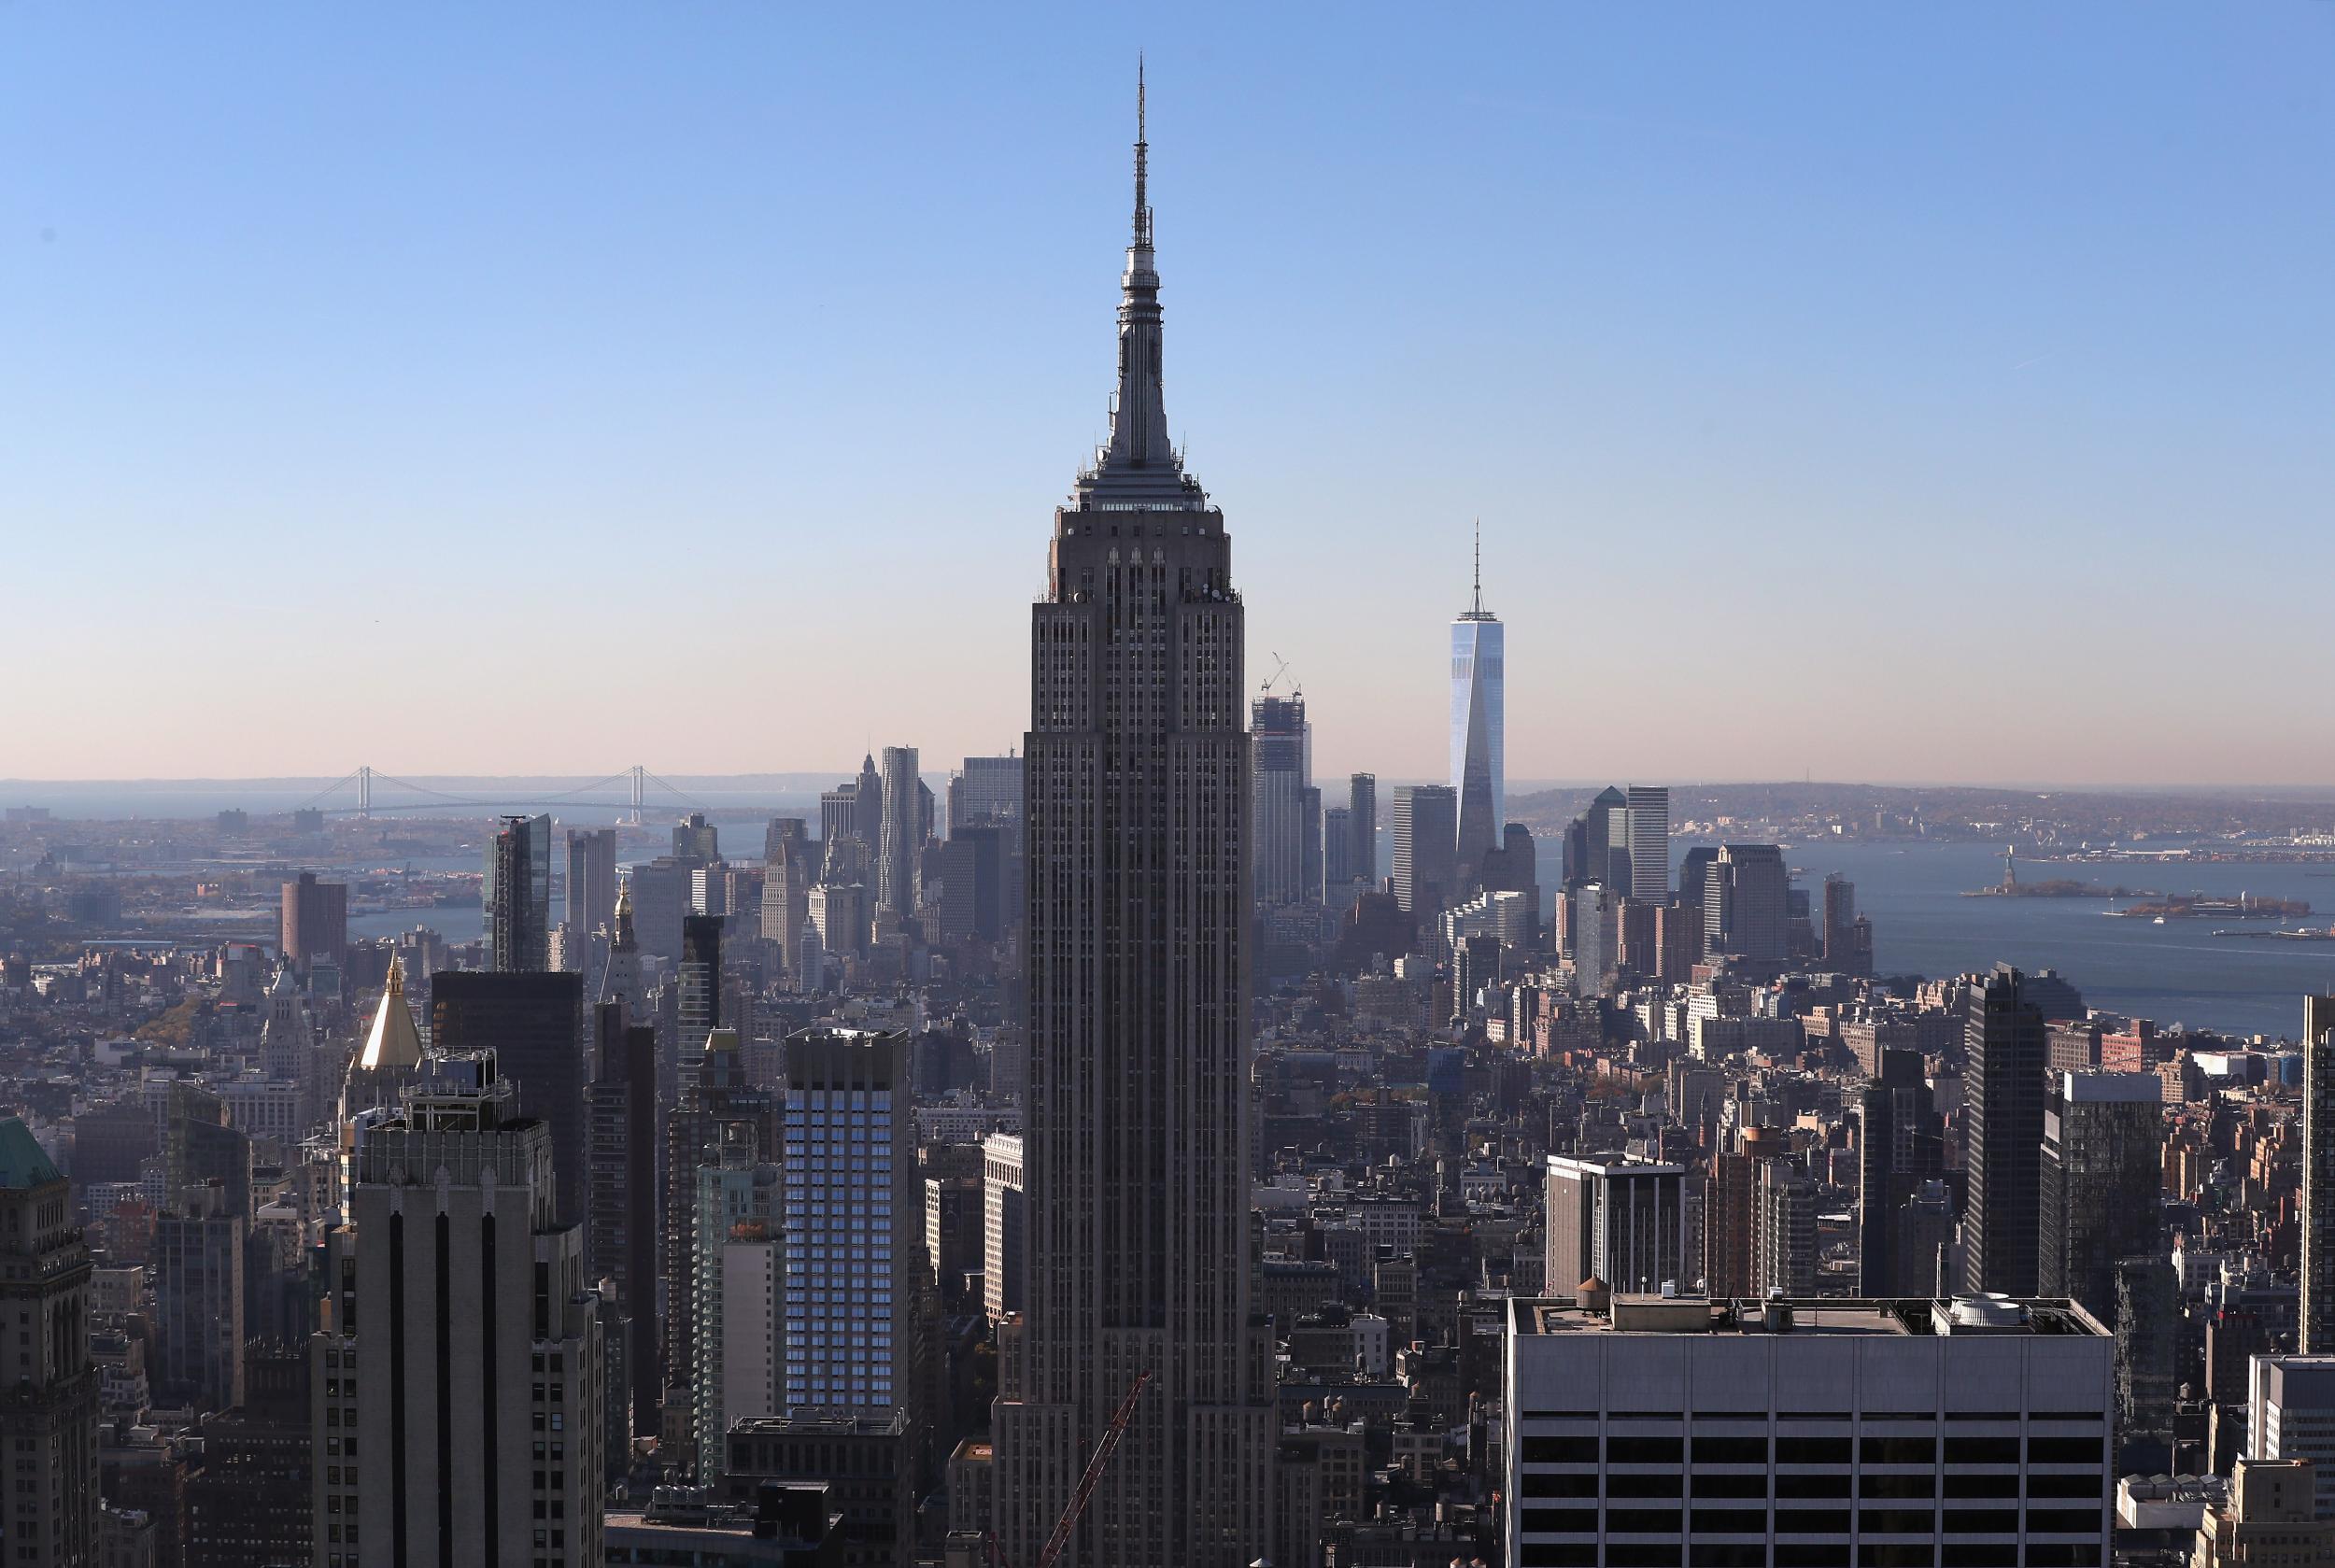 New York is relatively expensive - but you already knew that